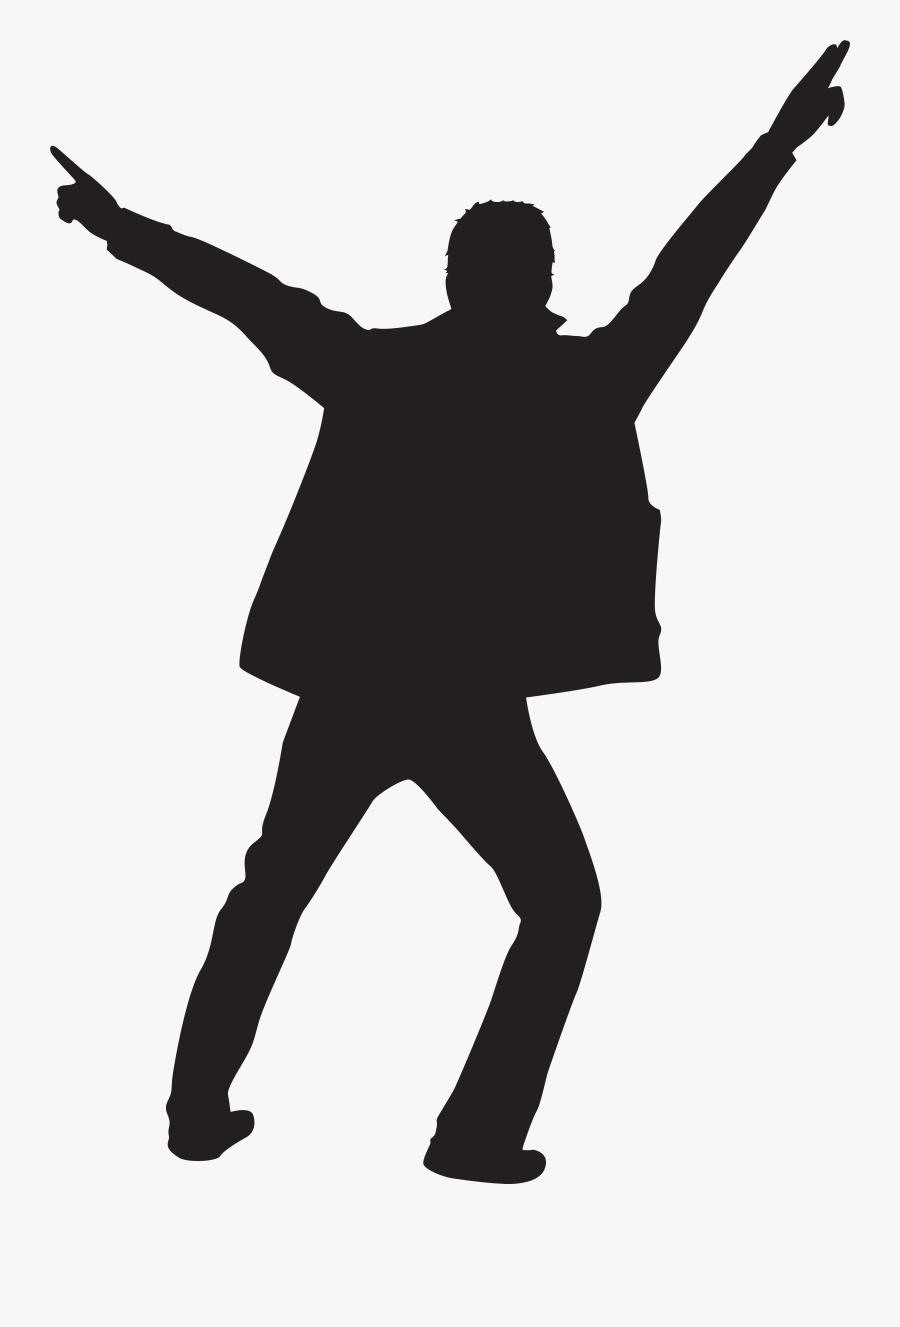 Dancing Man Silhouette At - Dance Man Silhouette Png, Transparent Clipart